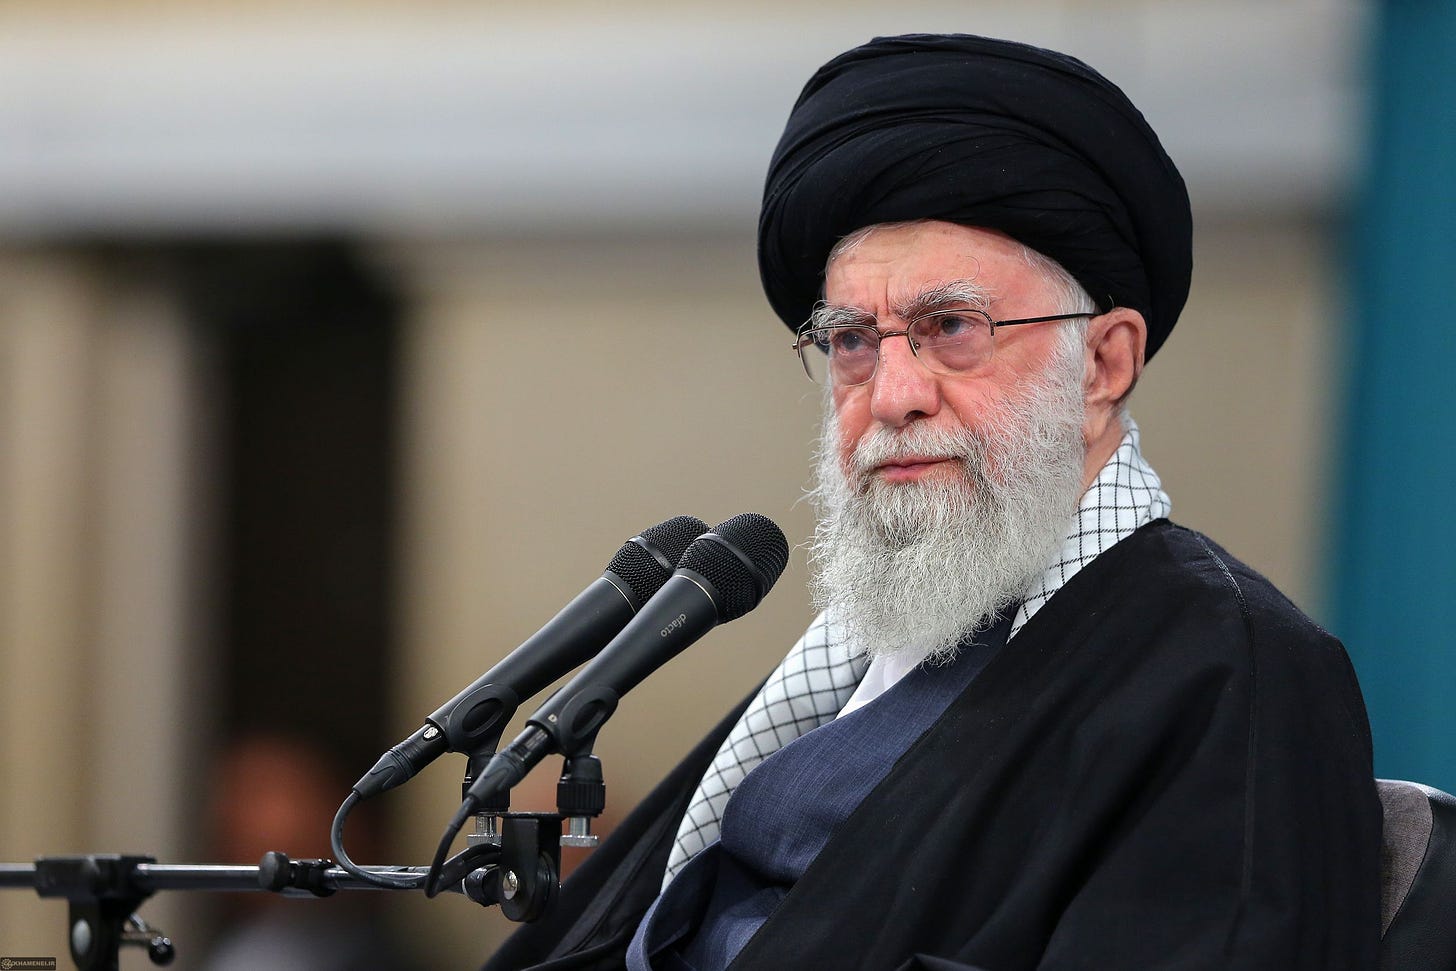 Iran's Supreme Leader Ayatollah Ali Khamenei had vowed to hit back at Israel after a strike on his country's consulate in Syria